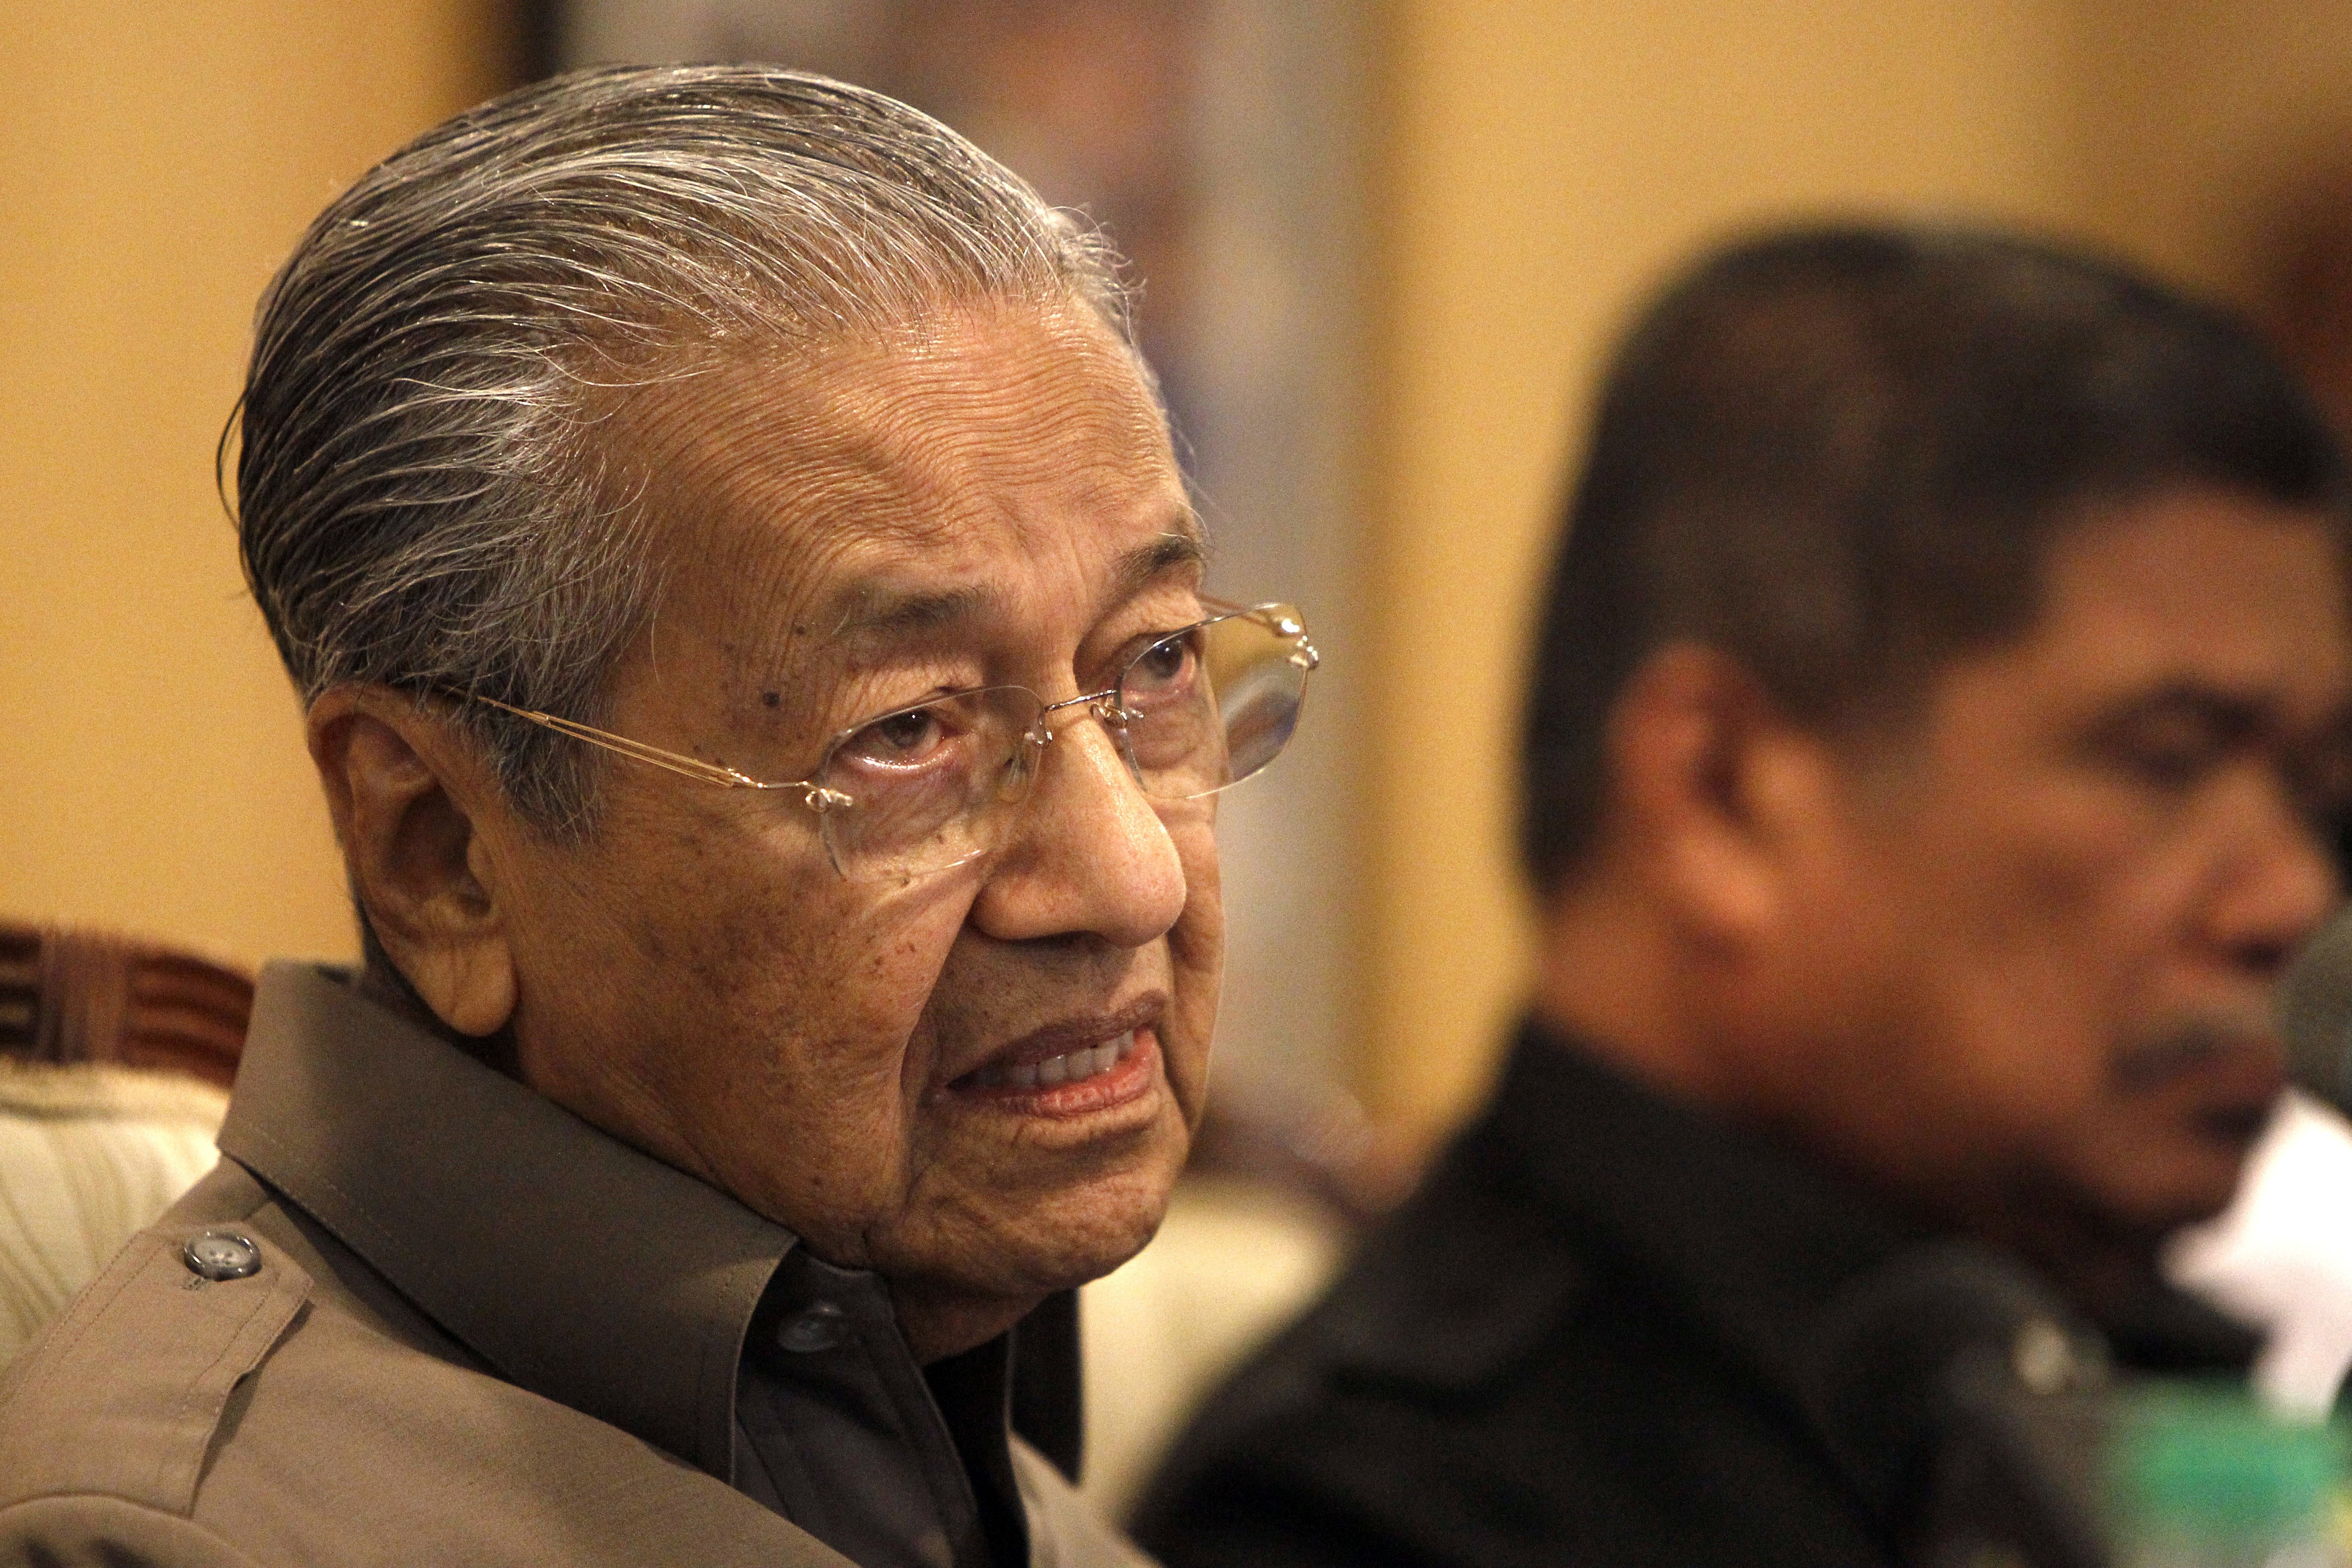 Mahathir has emphasised his decision to suspend infrastructure deals involving Chinese companies was based purely on economic factors but some commentators have speculated there may be a broader strategy of maintaining diplomatic distance from Beijing